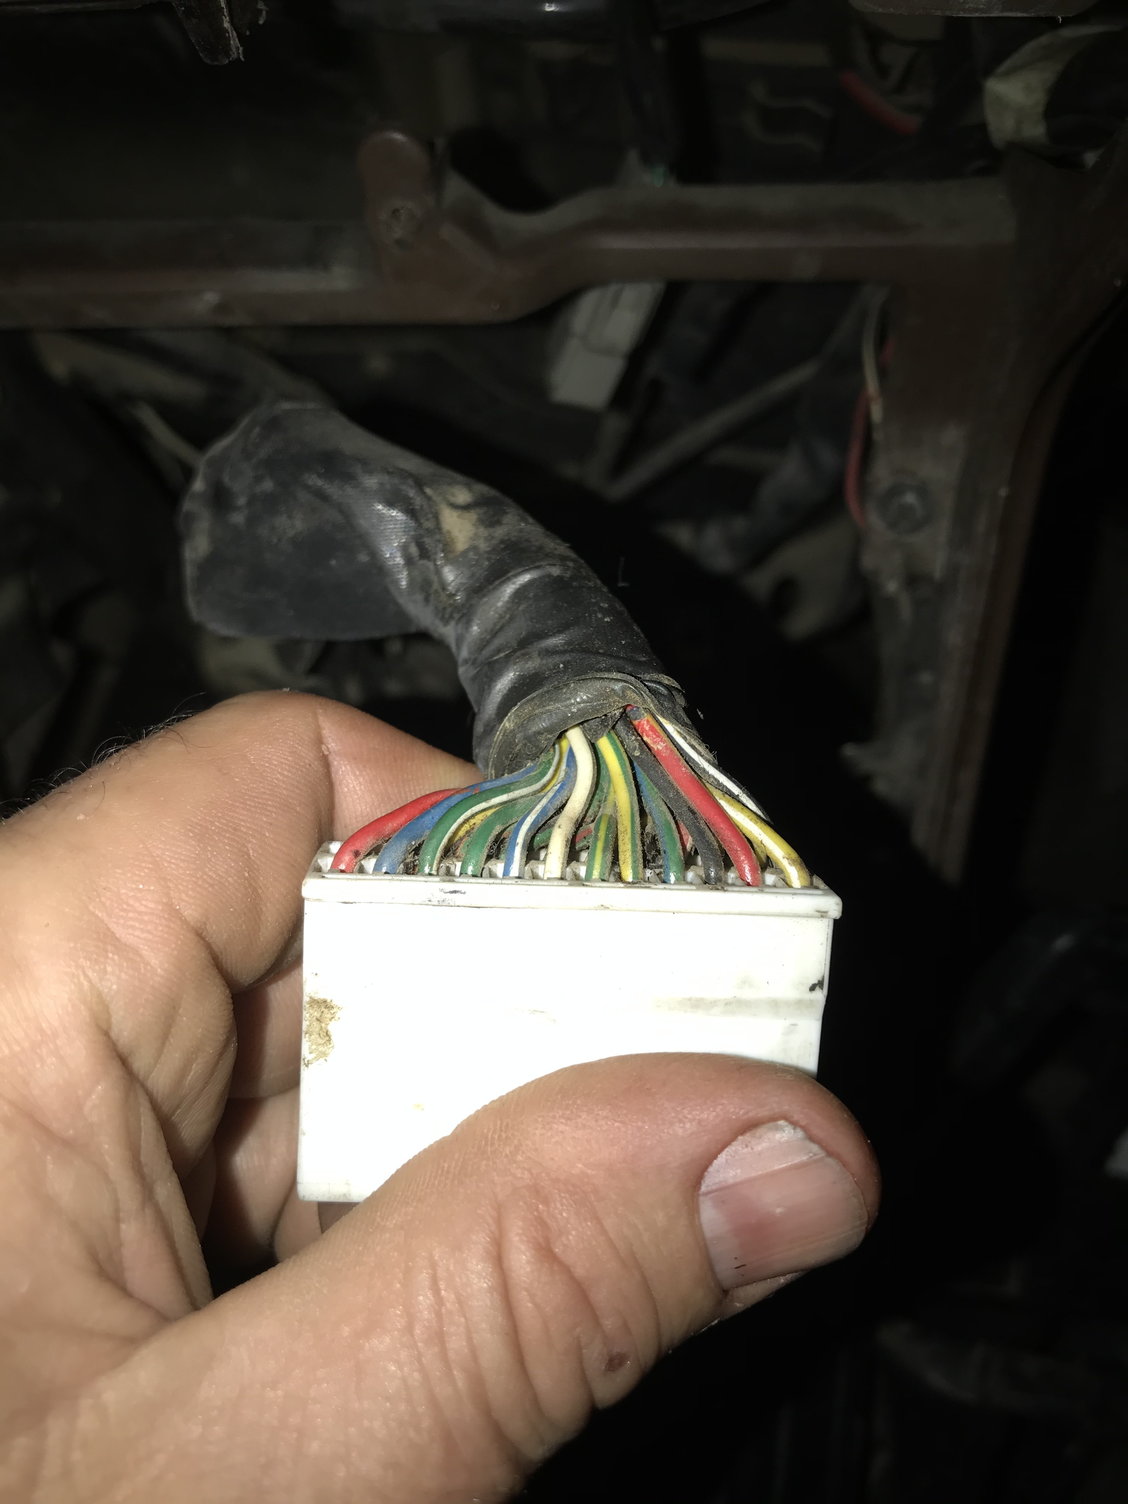 1986 Toyota Pickup - Stereo Wiring - YotaTech Forums